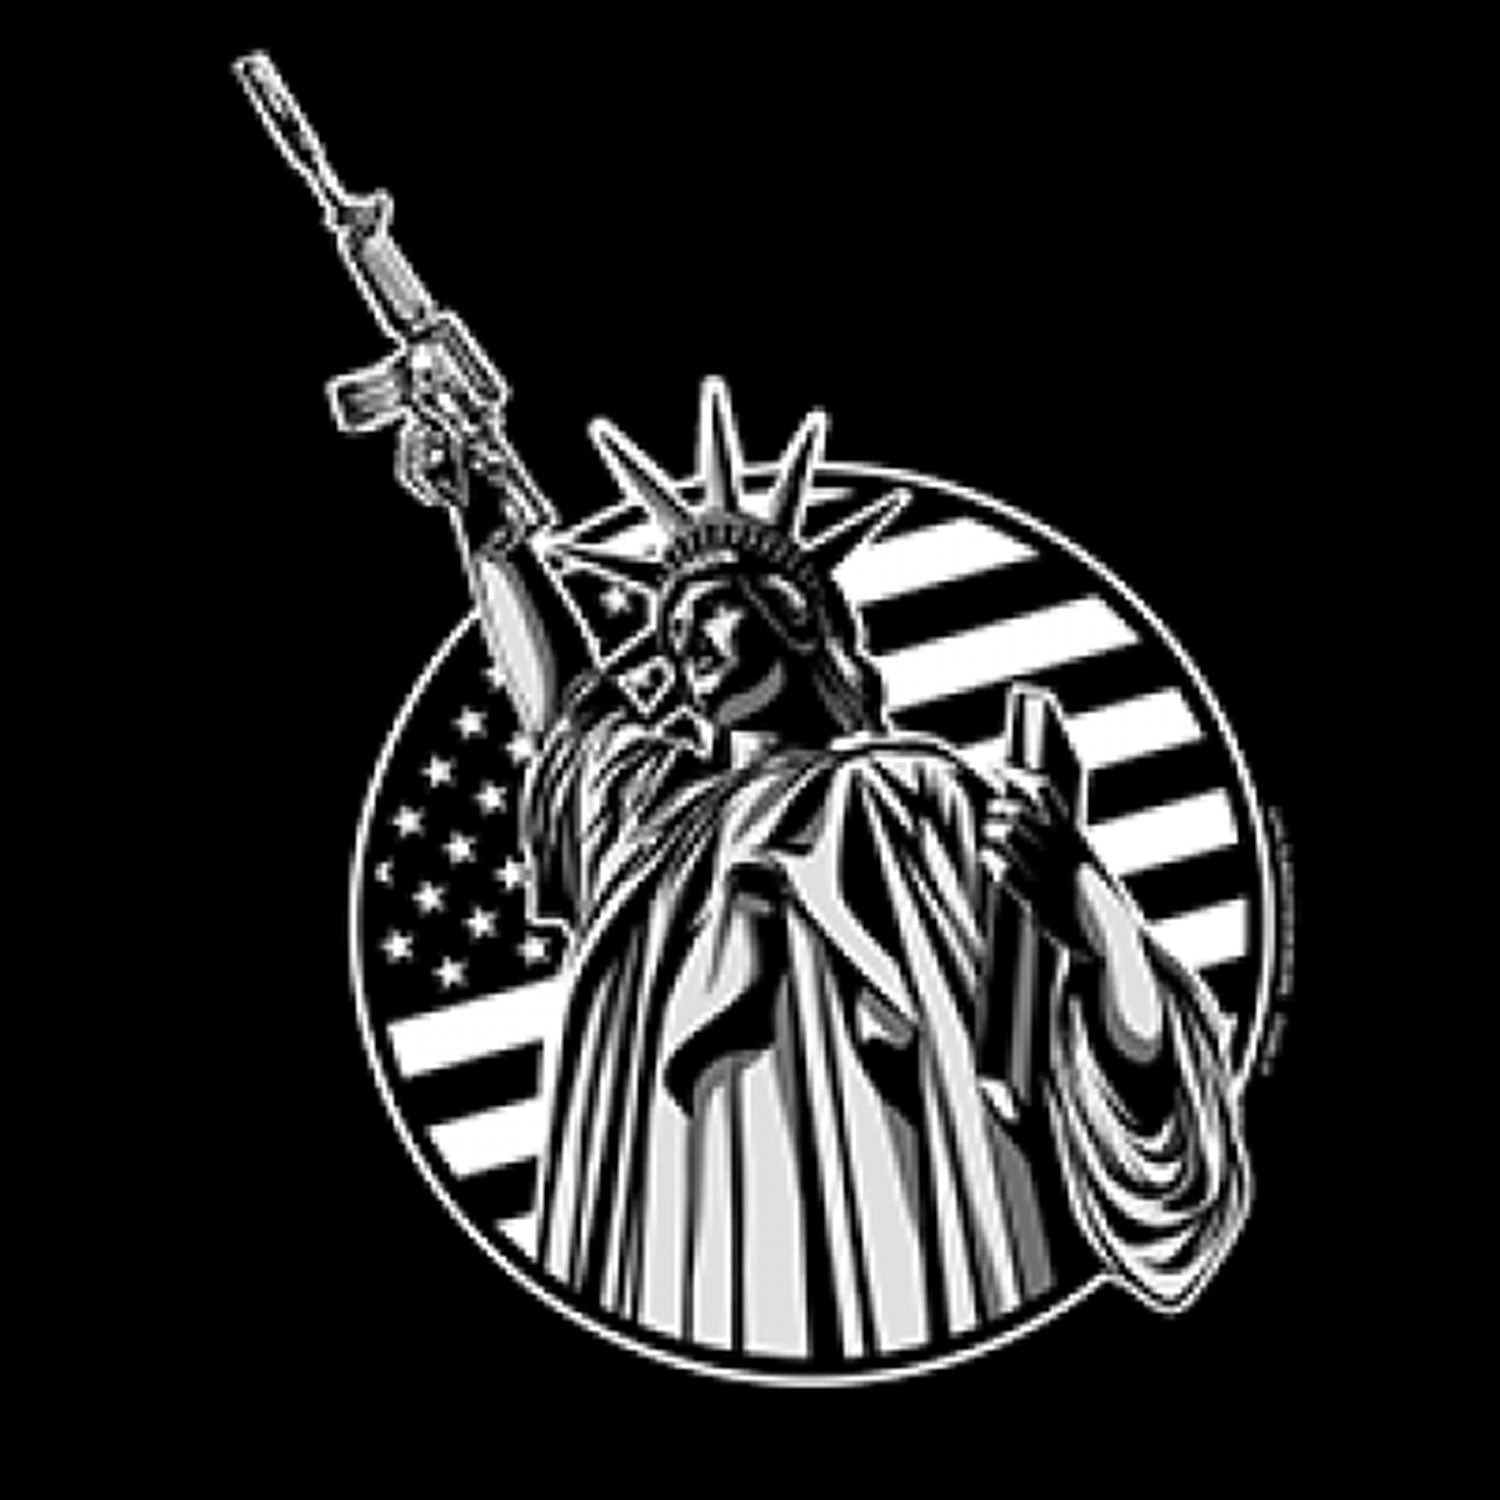 Statue Of Liberty with Flag and Gun Printed T-Shirt Tall